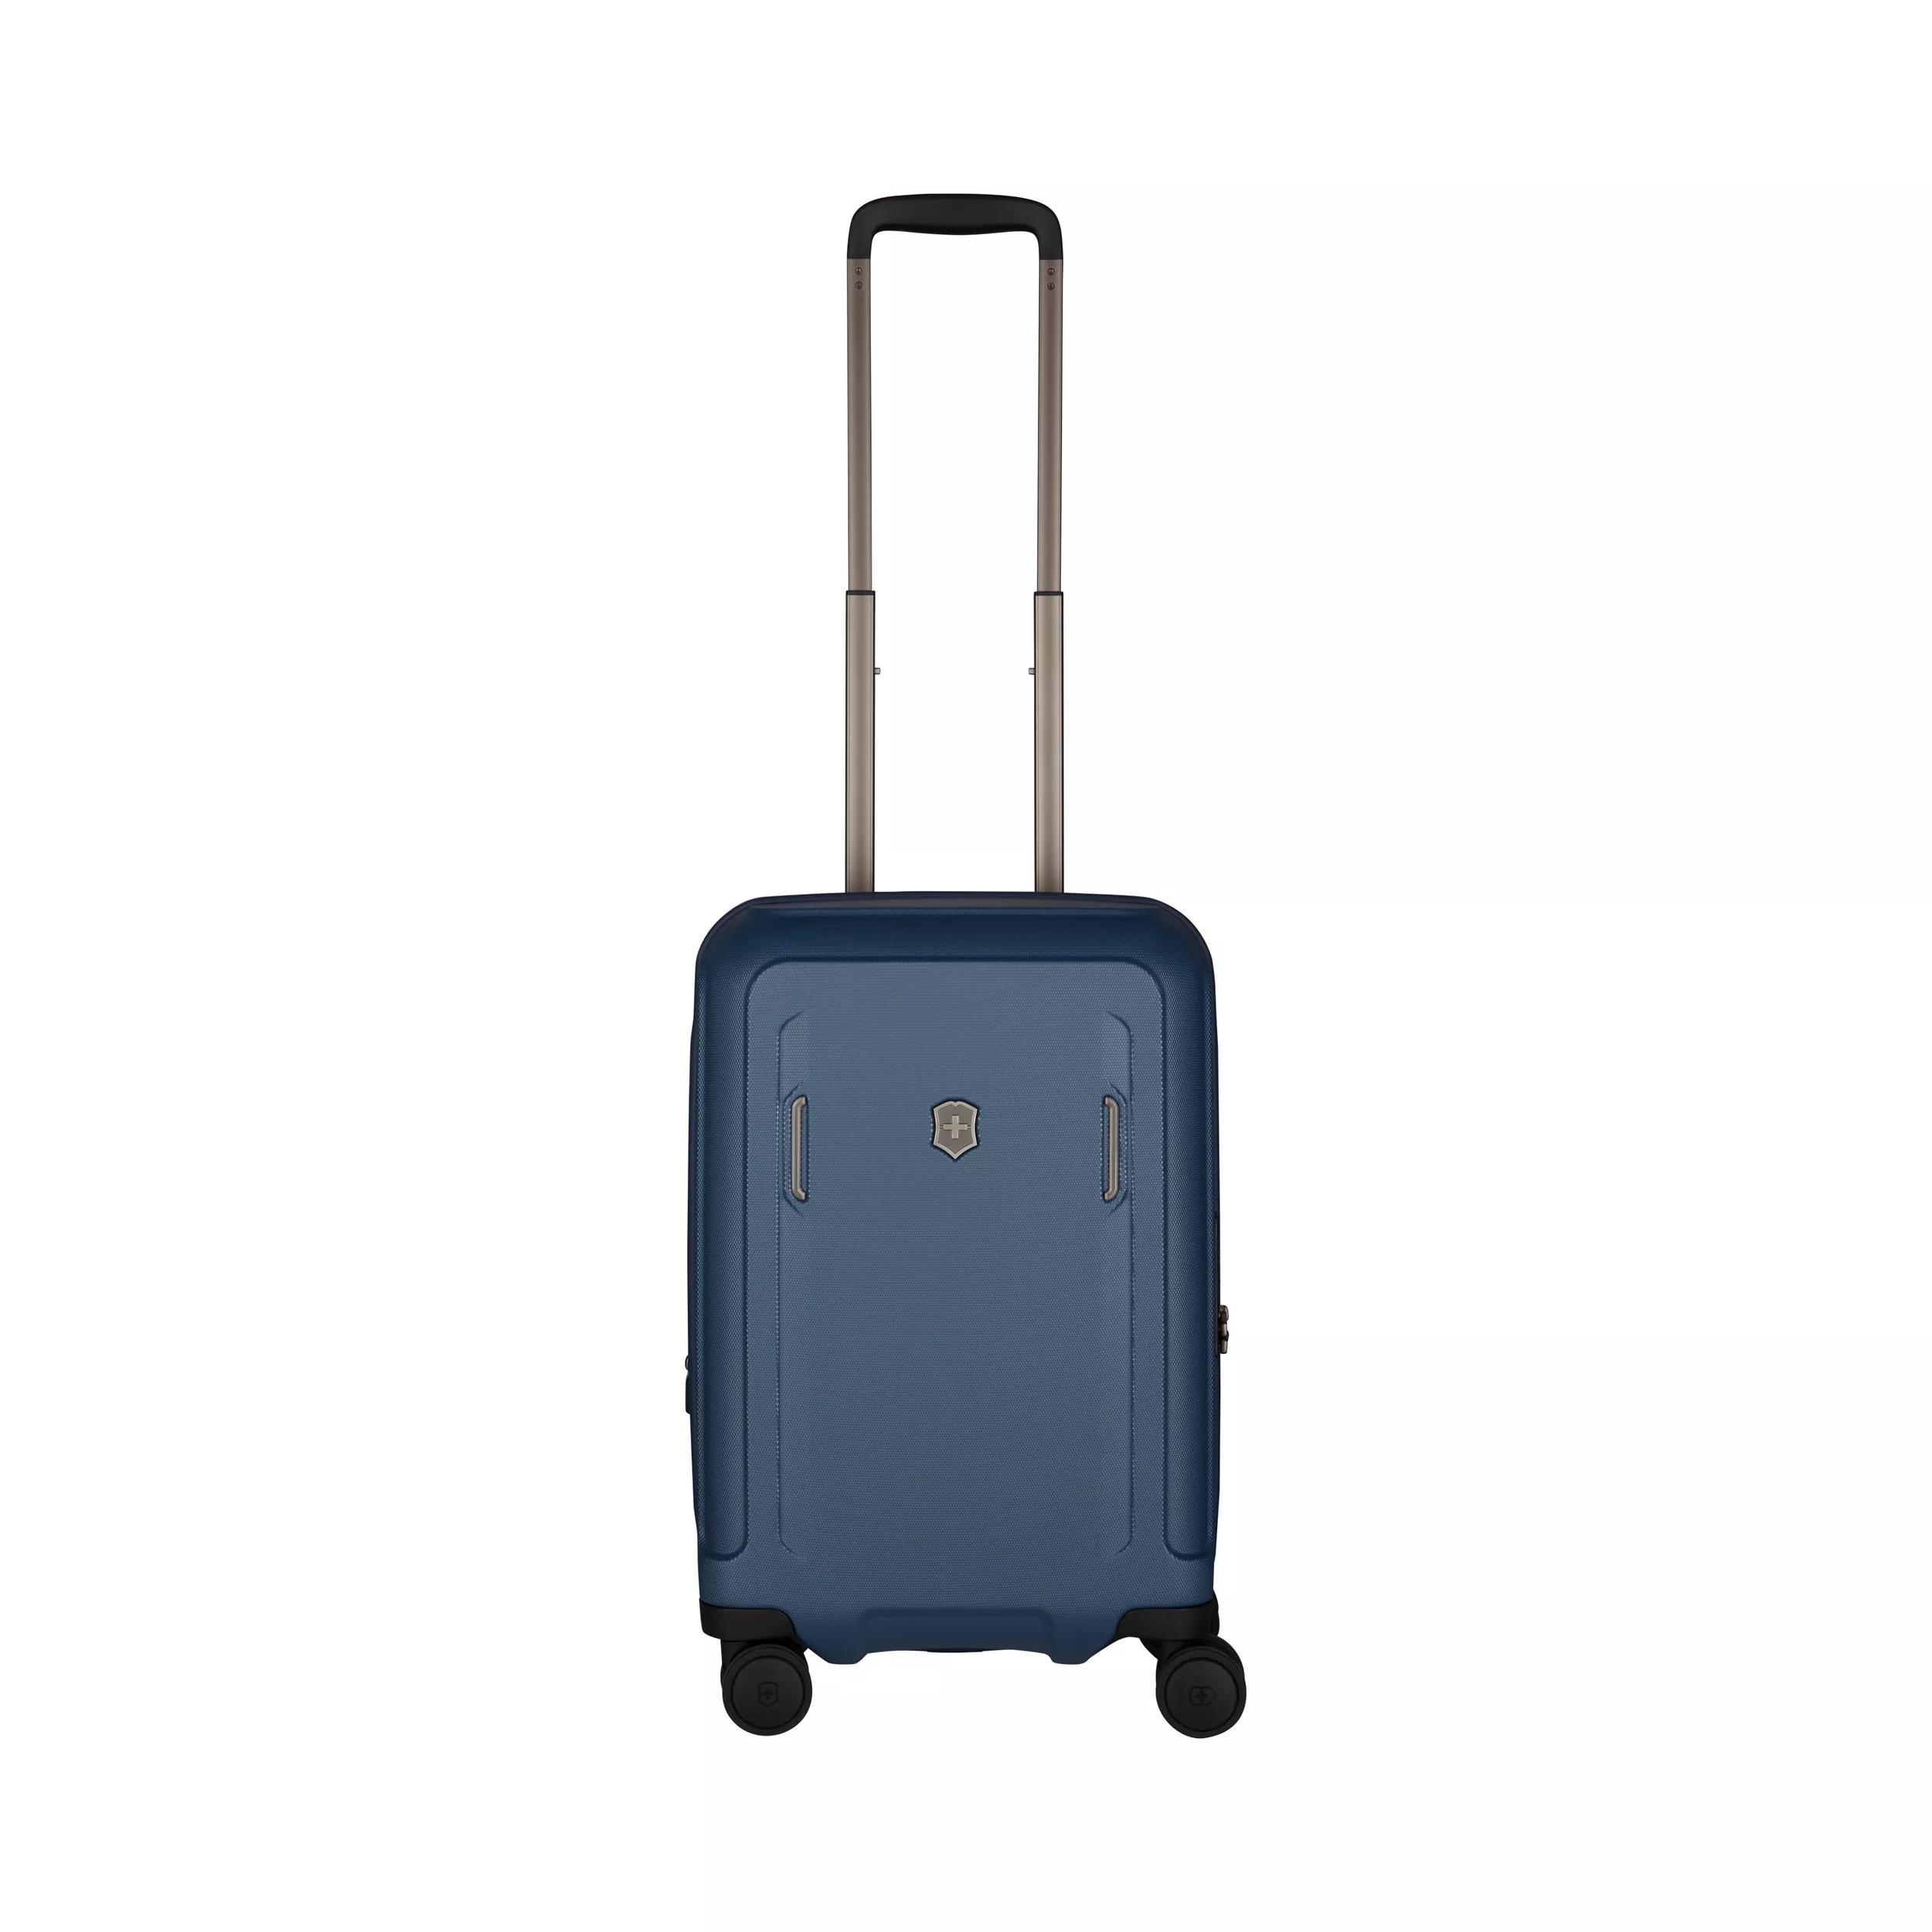 Victorinox Werks Traveler 6.0 Frequent Flyer Carry-On in blue - 609967